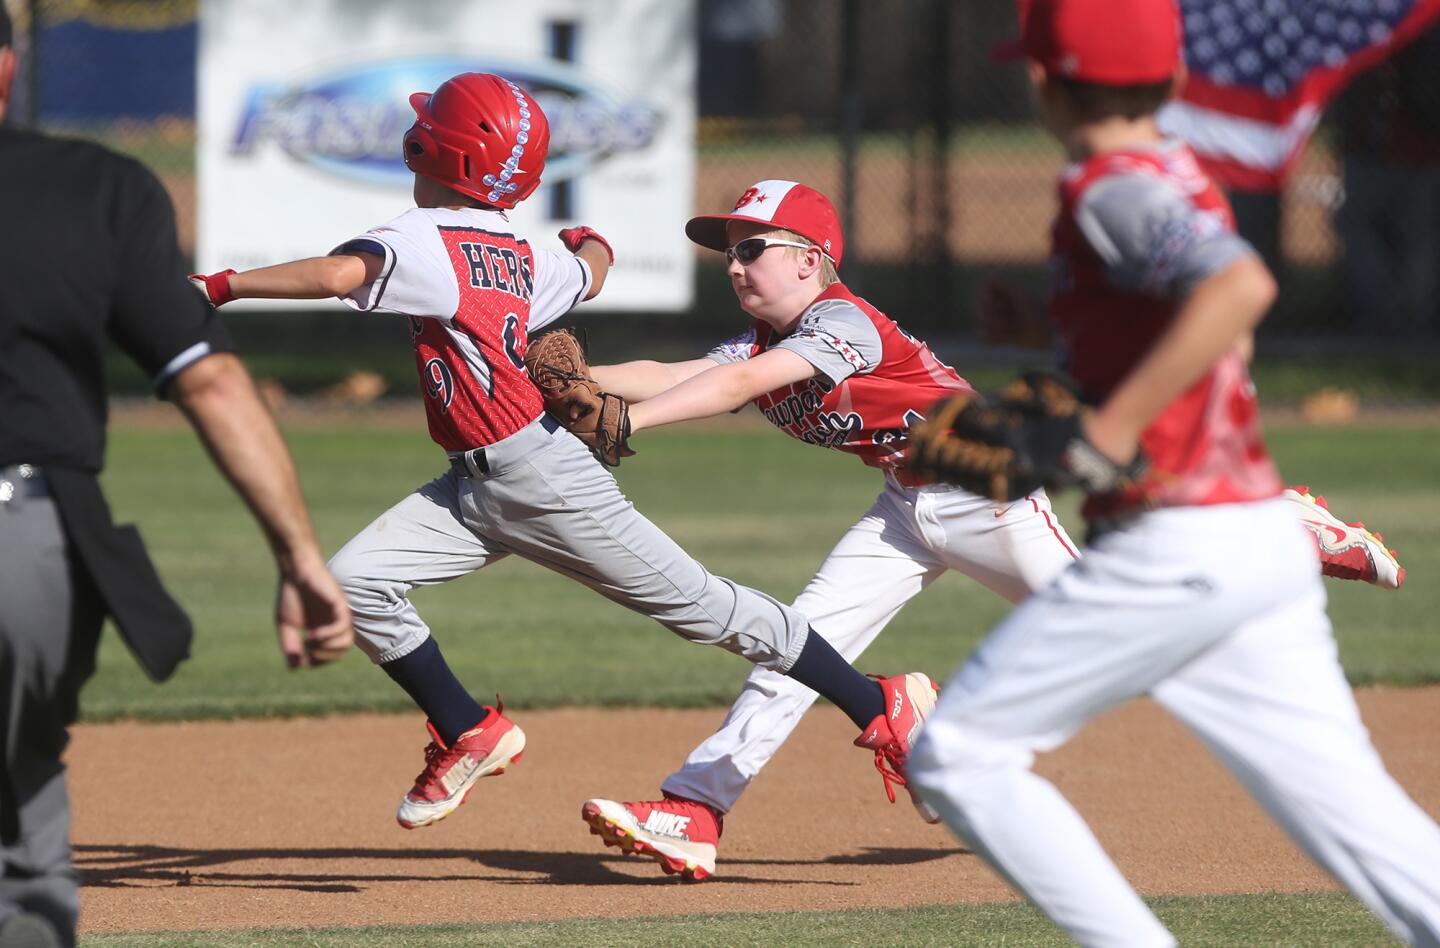 Newport Beach shortstop Charlie Kaster tags a Dana Point base runner stuck in a rundown during PONY Mustang 10-and-under section tournament at Del Obispo Community Park in Dana Point on Thursday.